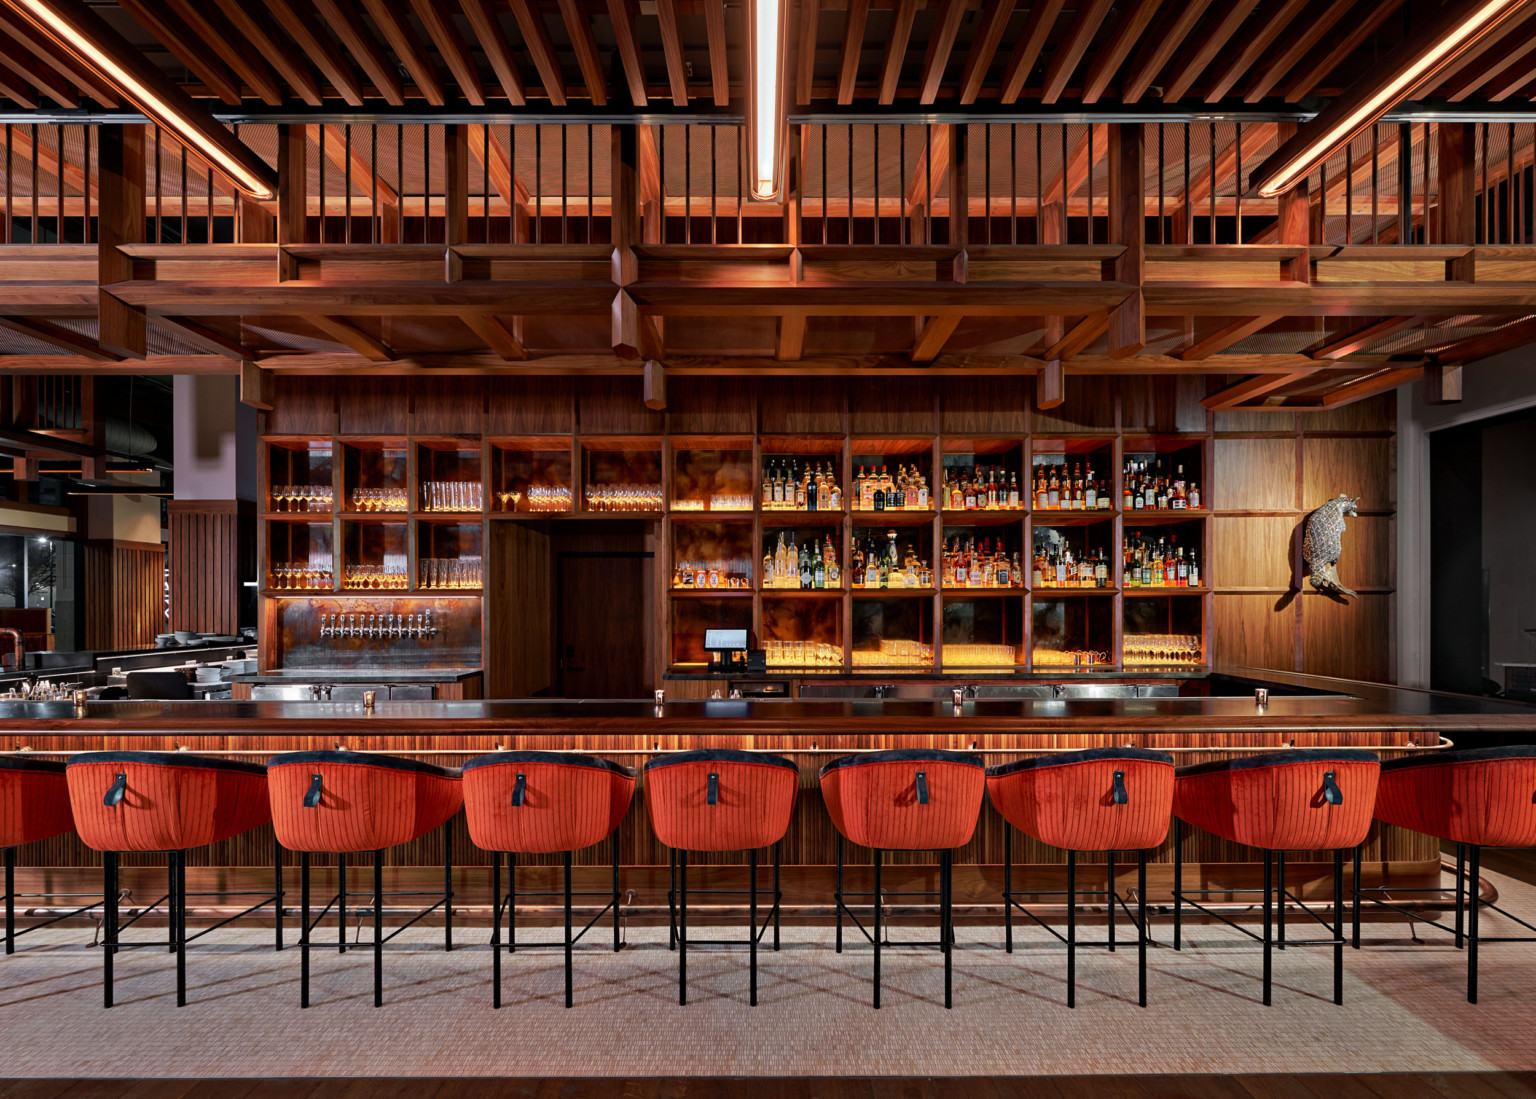 Large wood bar with built in shelves along the back. Wood overhang over back of bar, and stools with red and black upholstery